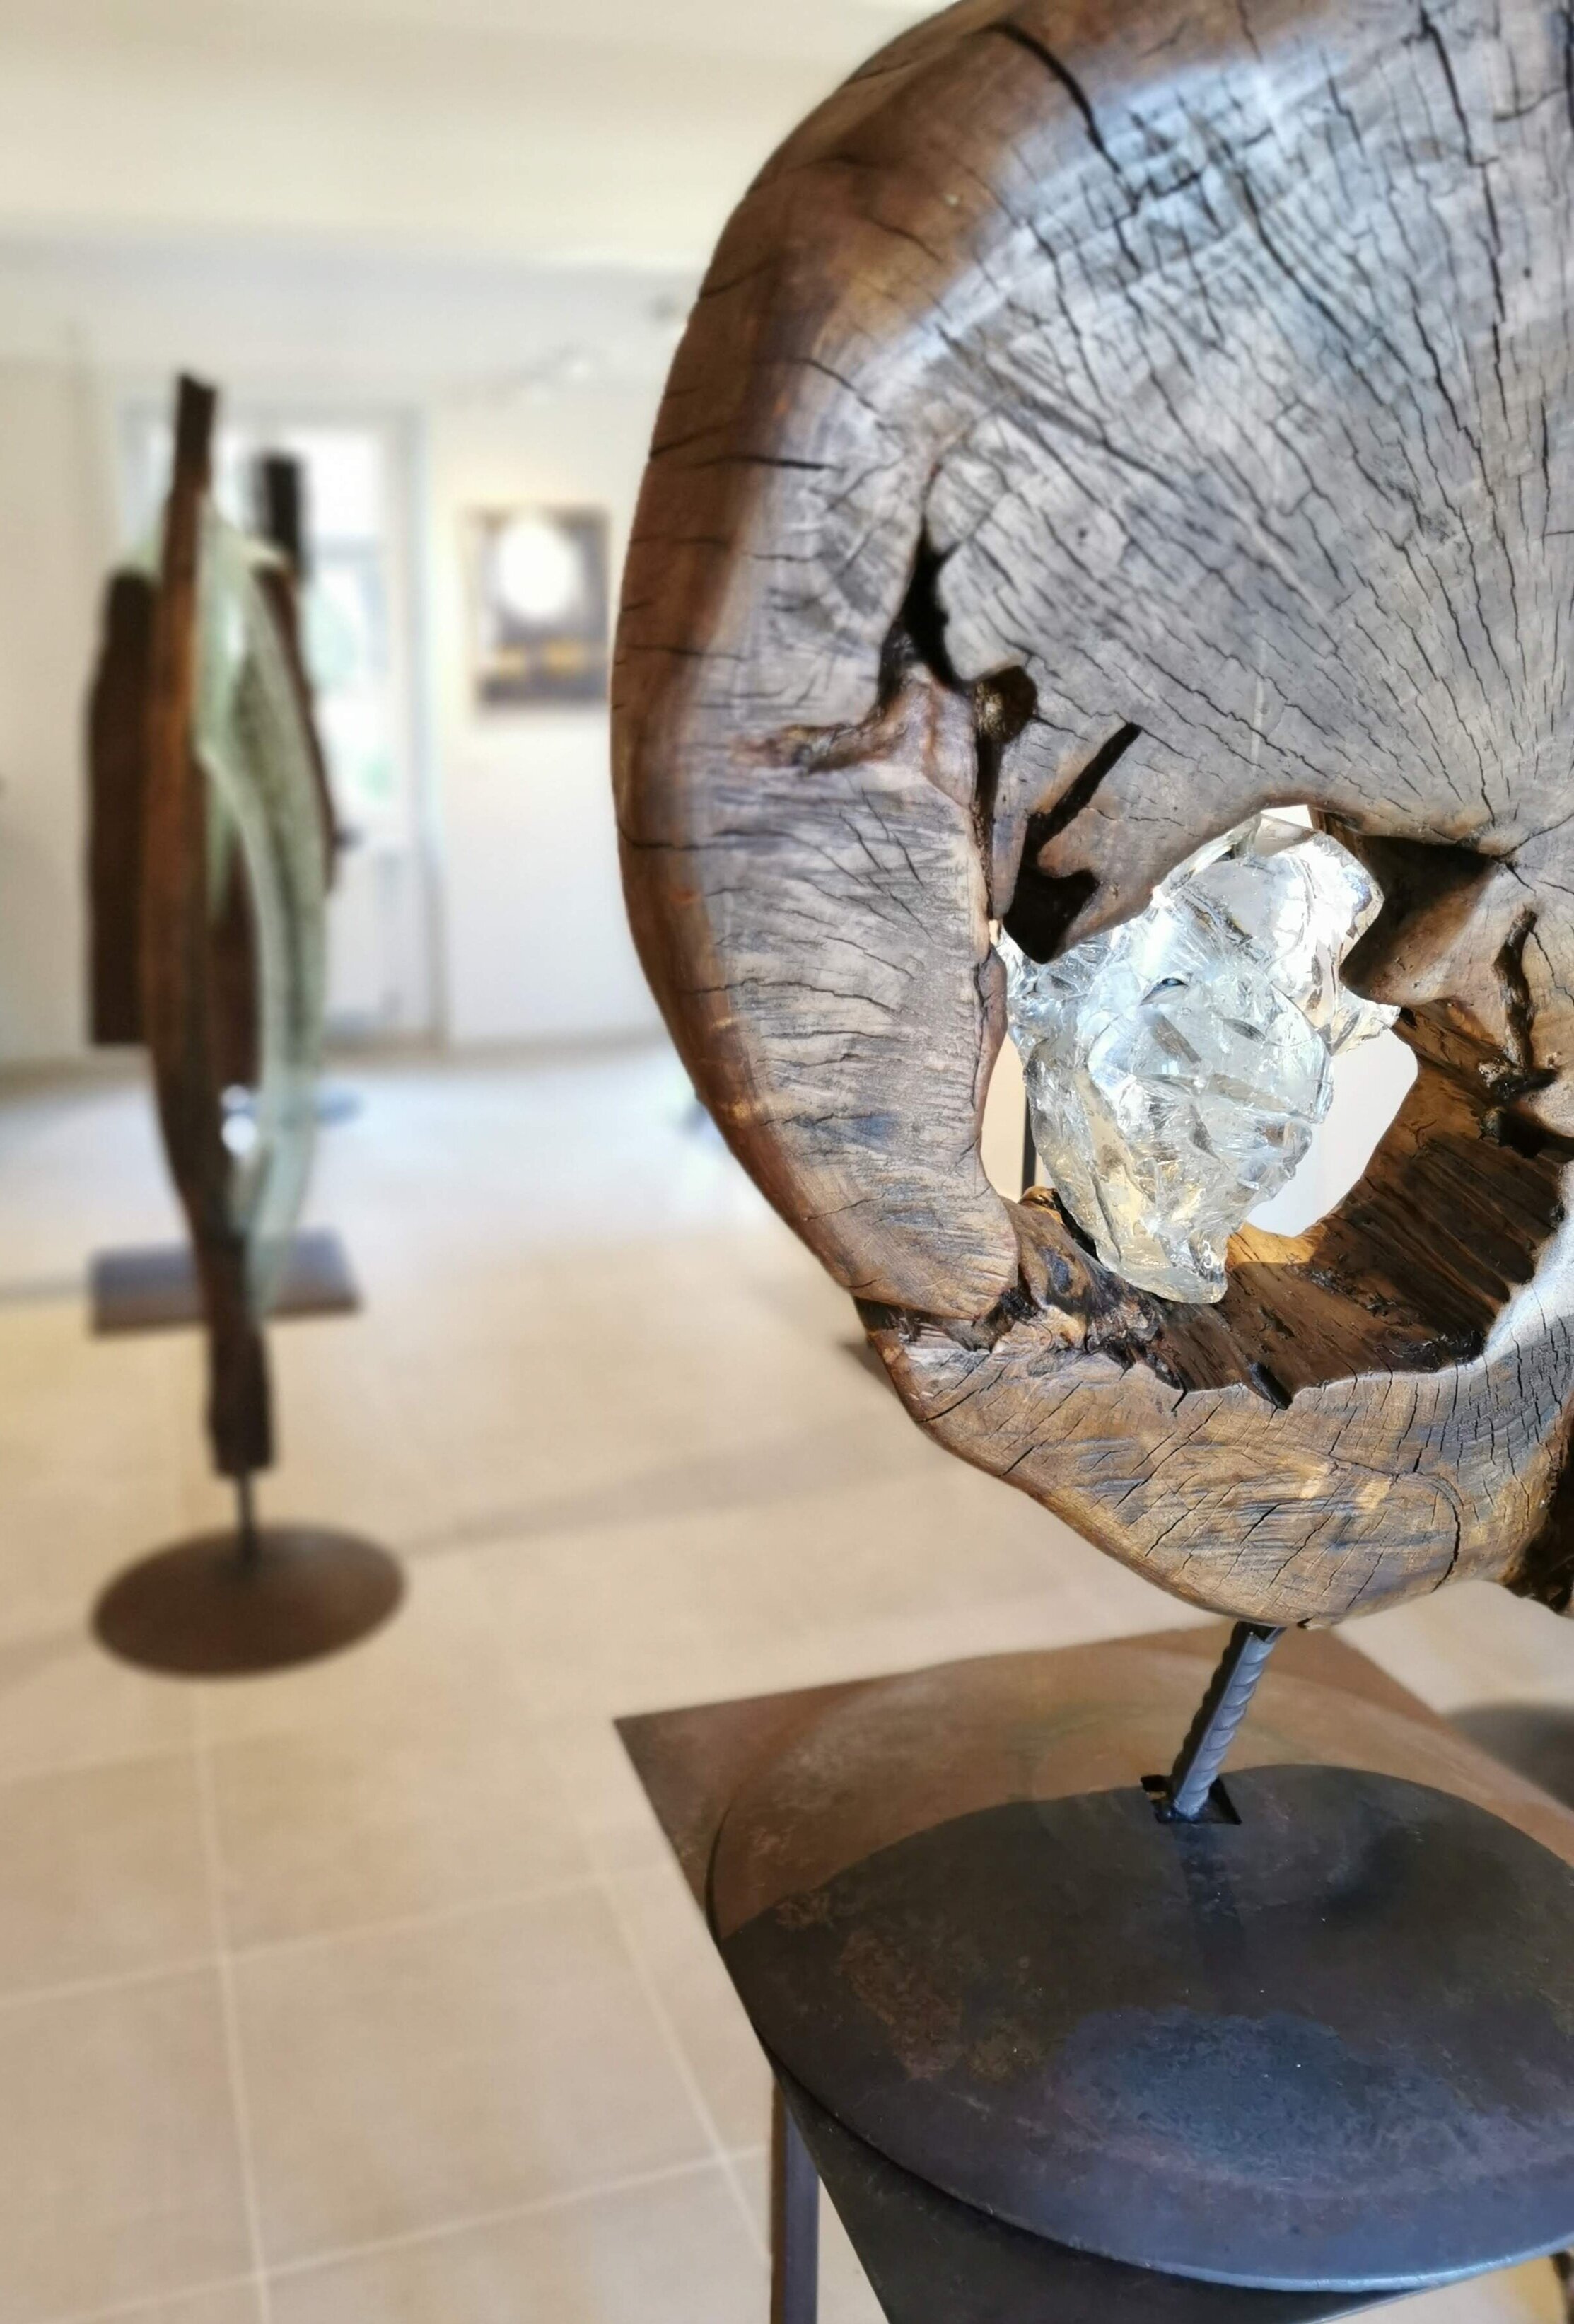 mixed media sculptures by Bernard Froment in wall wood and glass art